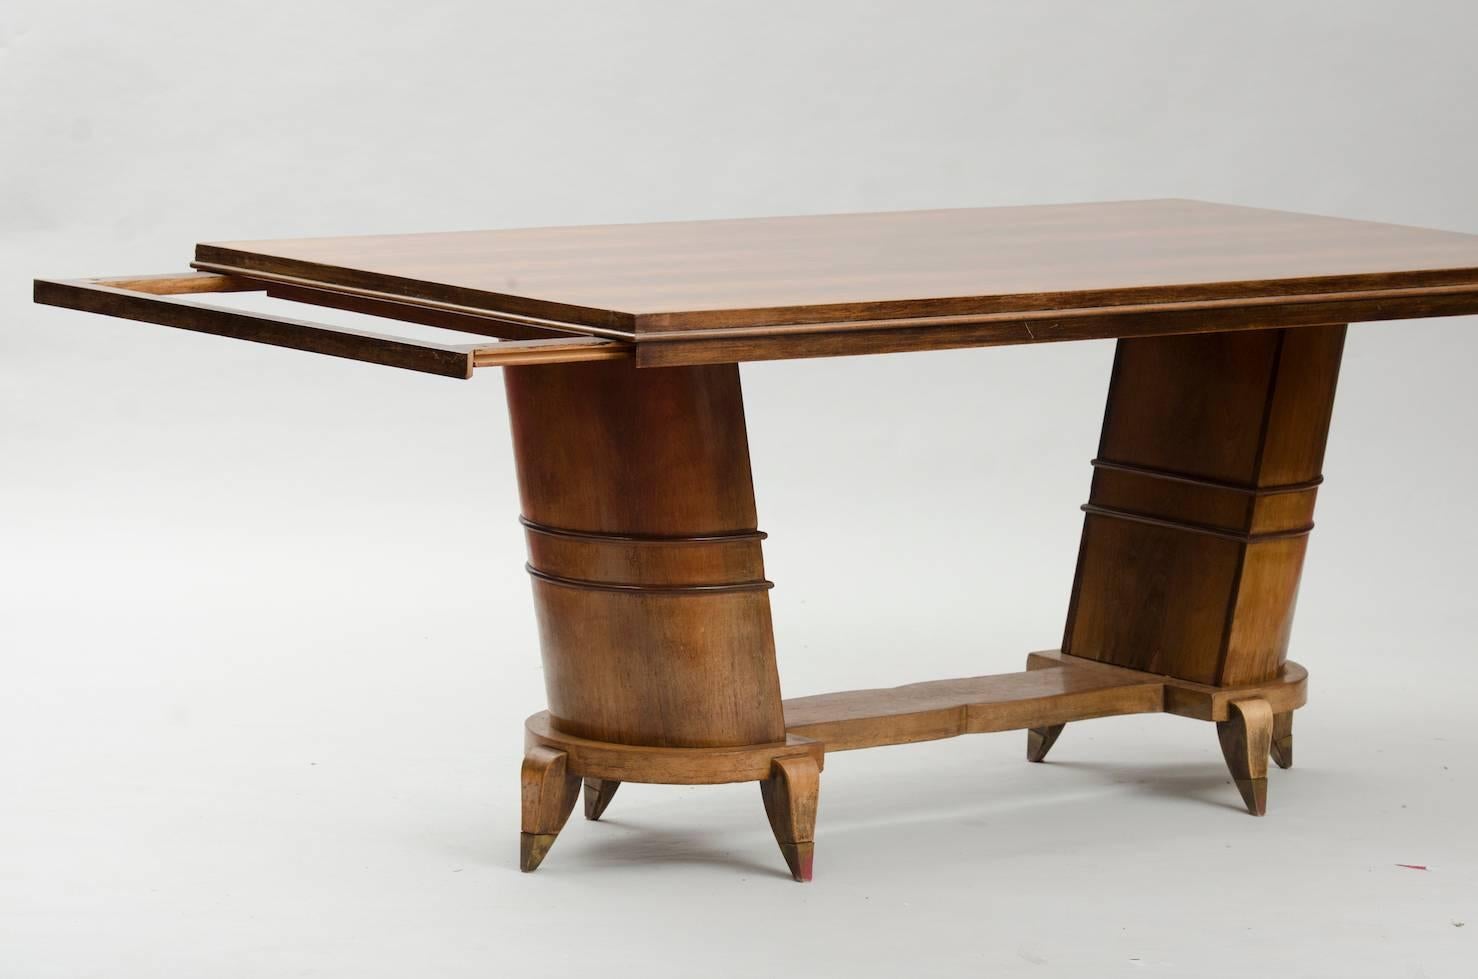 Rosewood and brass Art Deco extendable dining table.
Width: 175cm (closed), the extension leaves are not in rosewood veneer.
Price fully restored: 6000€
The price shown is in the original condition.
We have our own workshop and we can restore